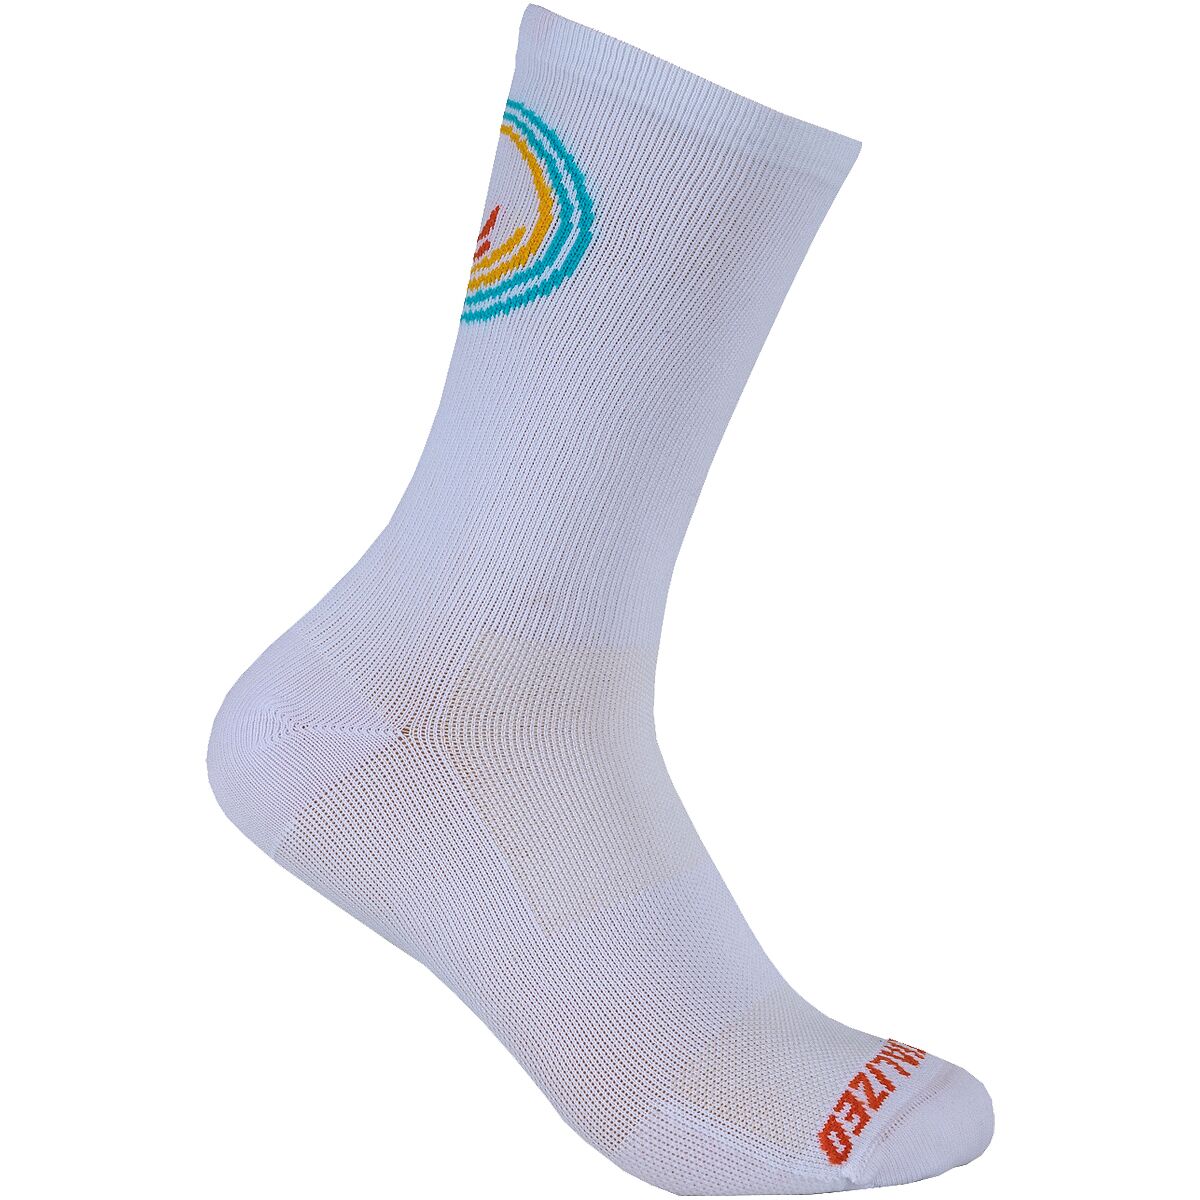 Specialized Road Tall Sock - Outride Collection - Men's